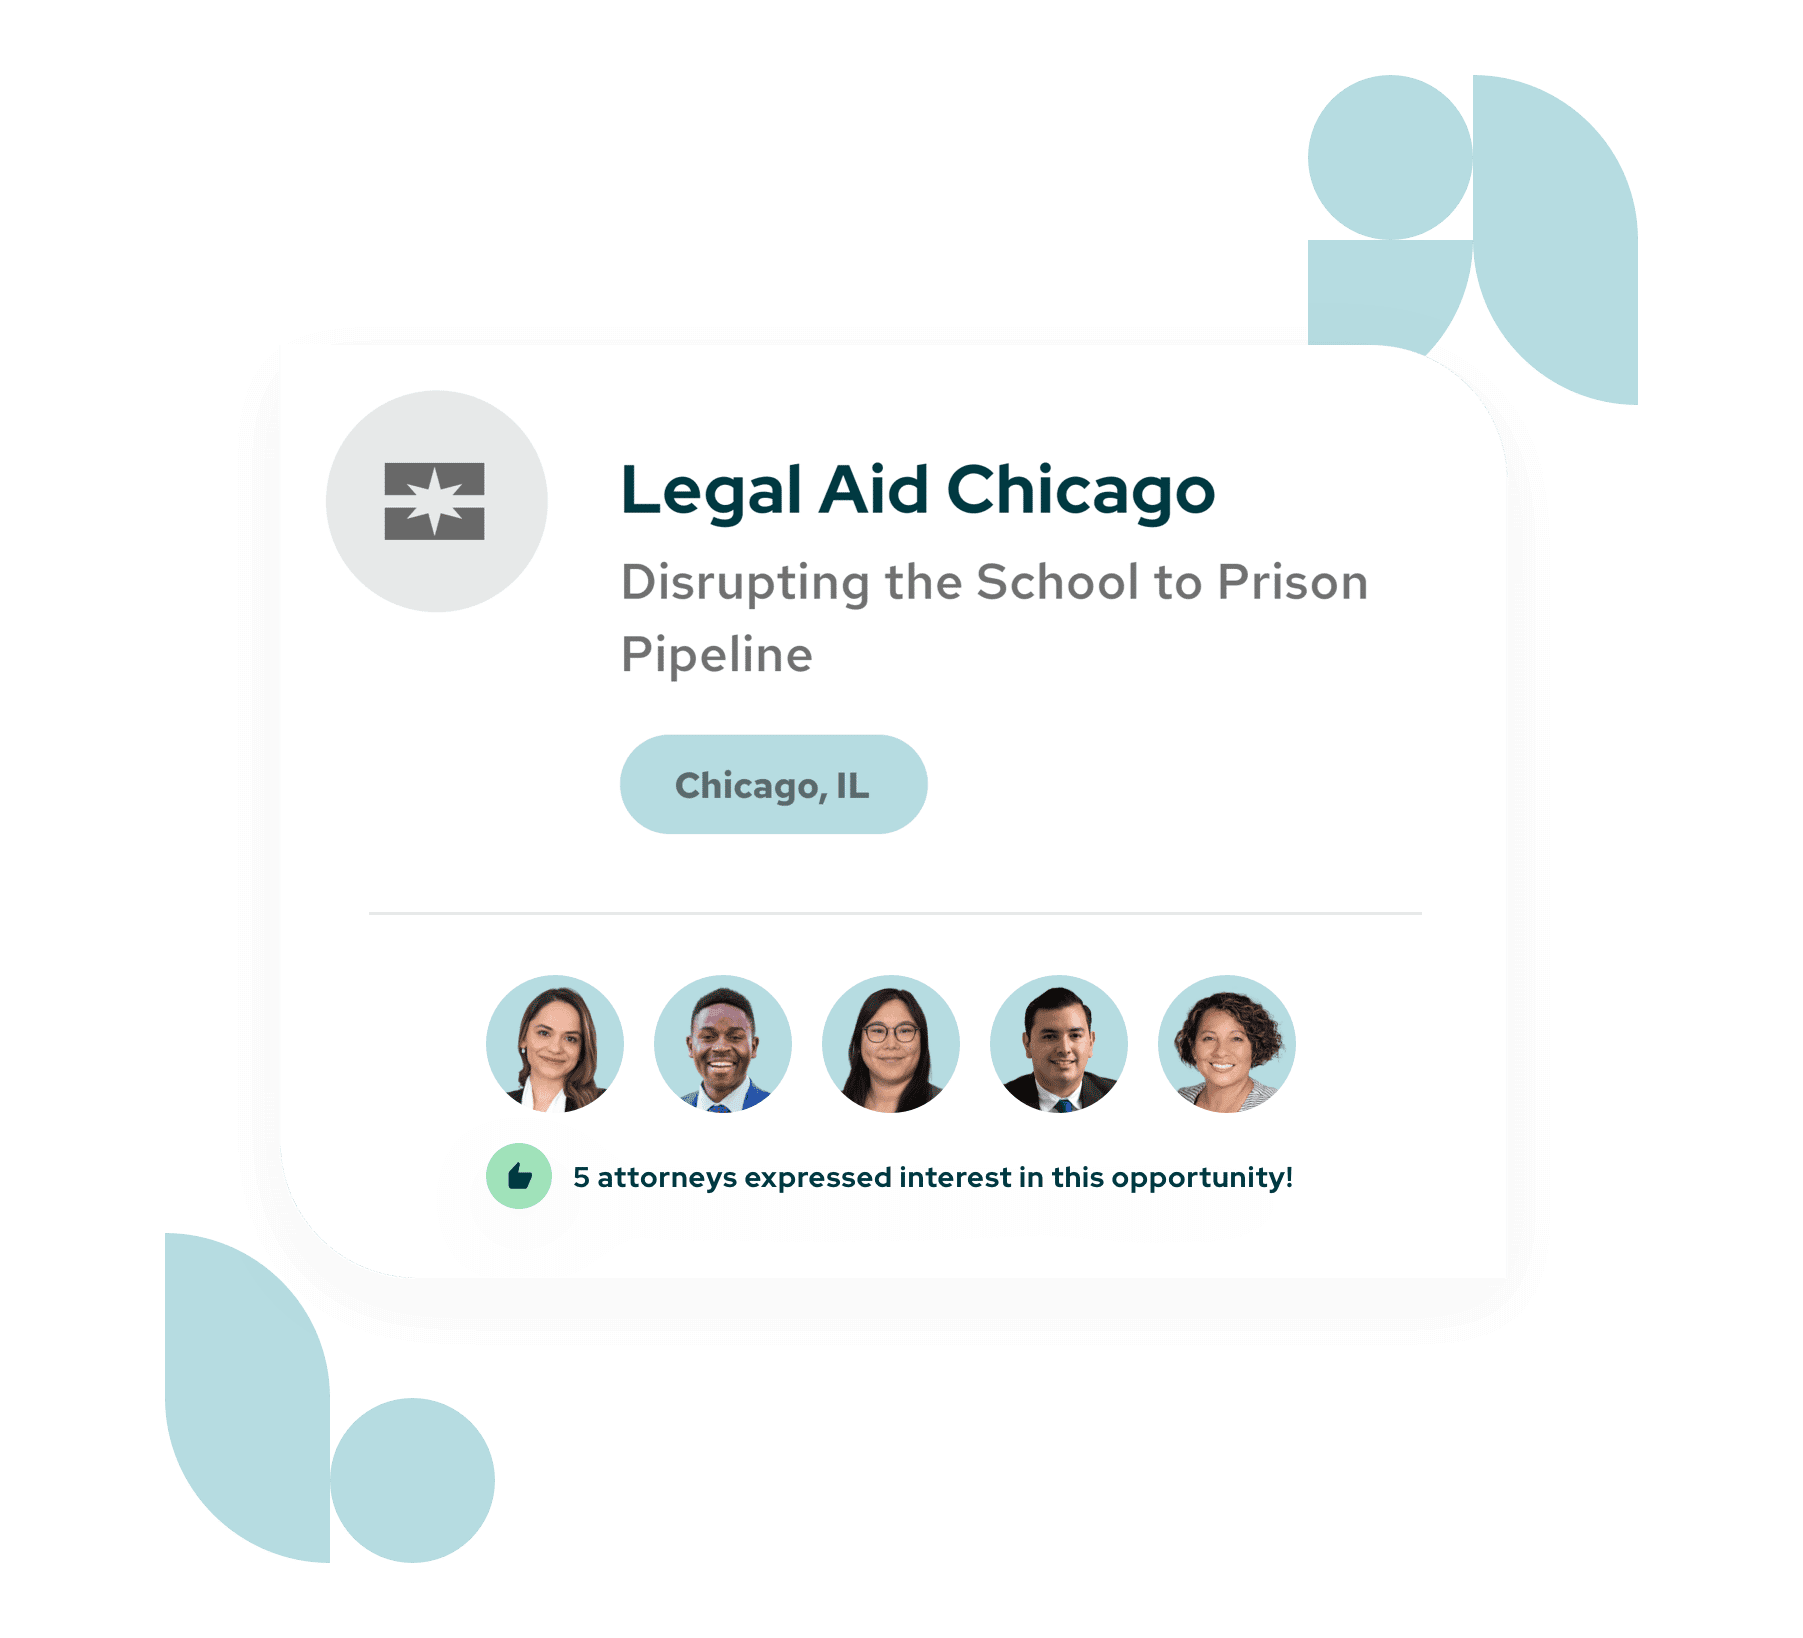 In-House Legal Teams and attorneys expressing interest in opportunity